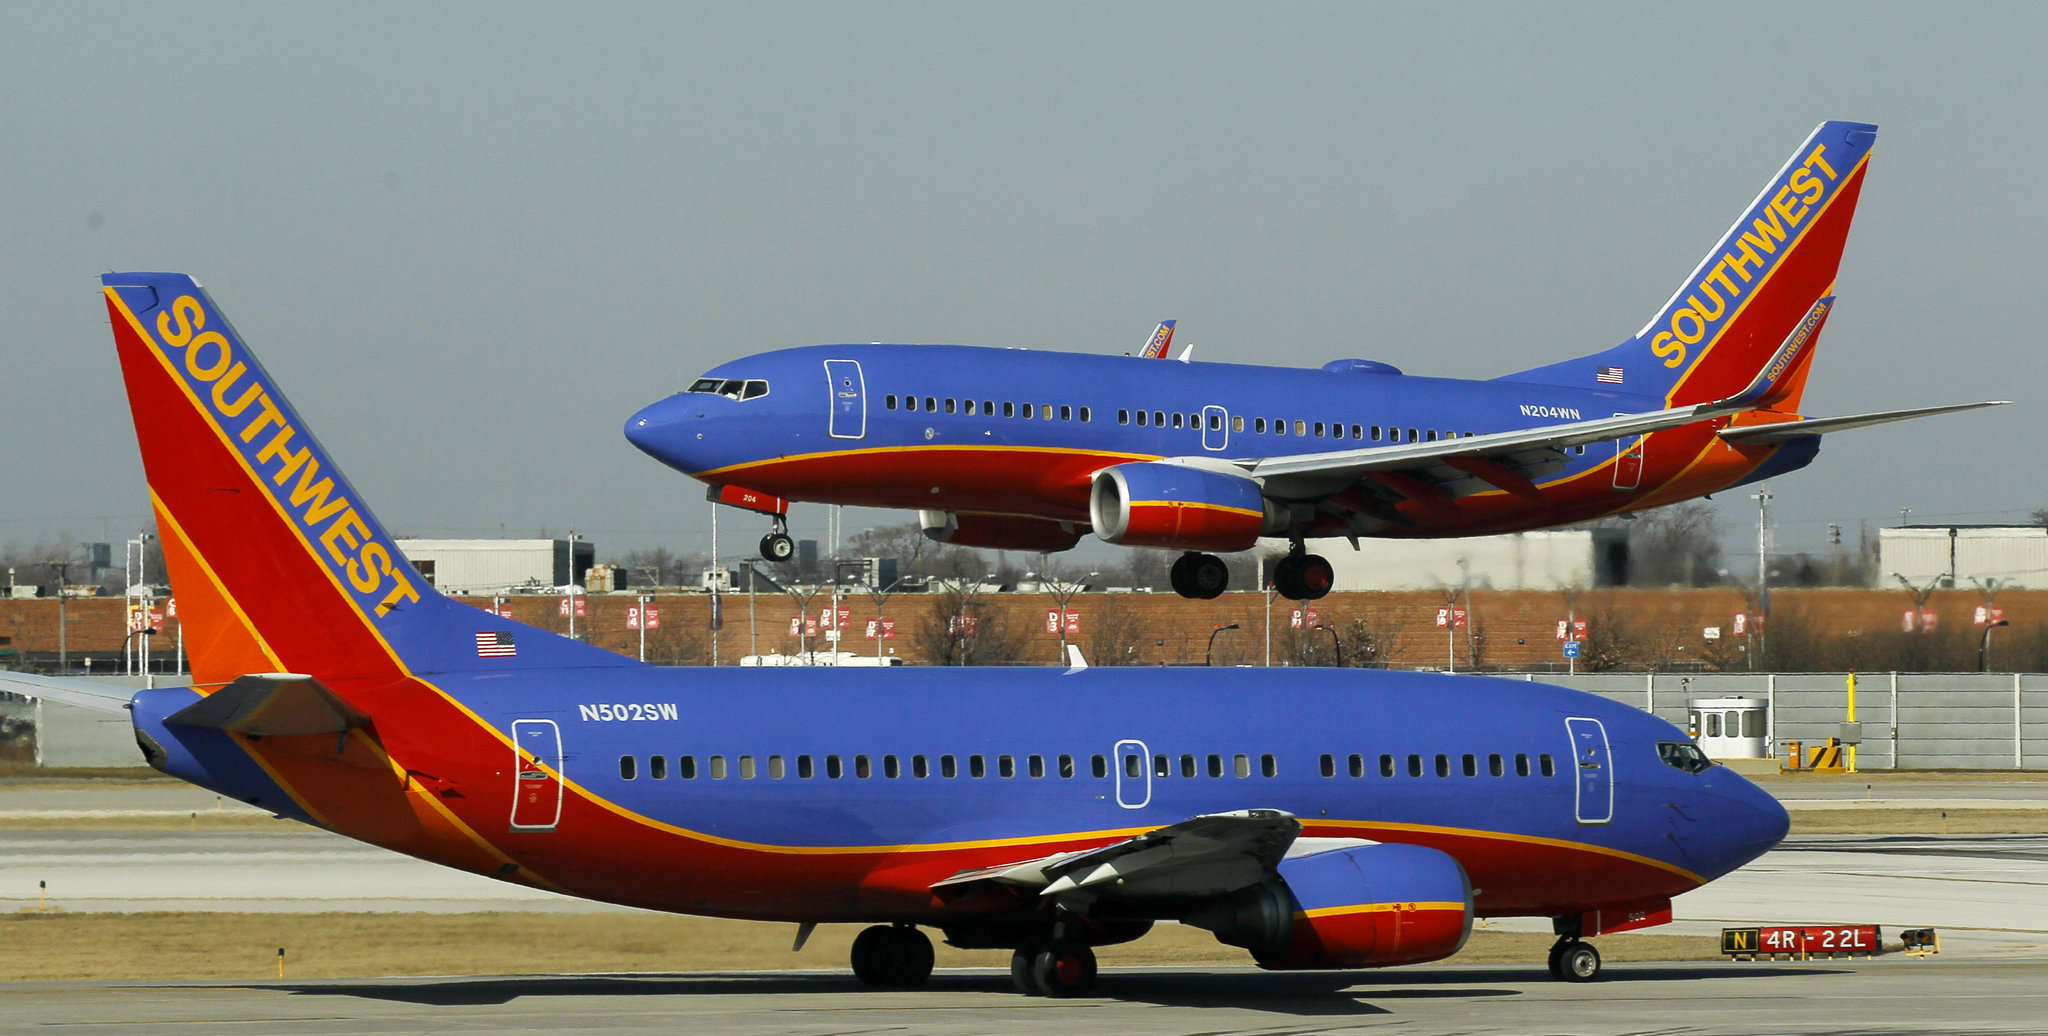 Southwest Airlines goes international today - The Winglet